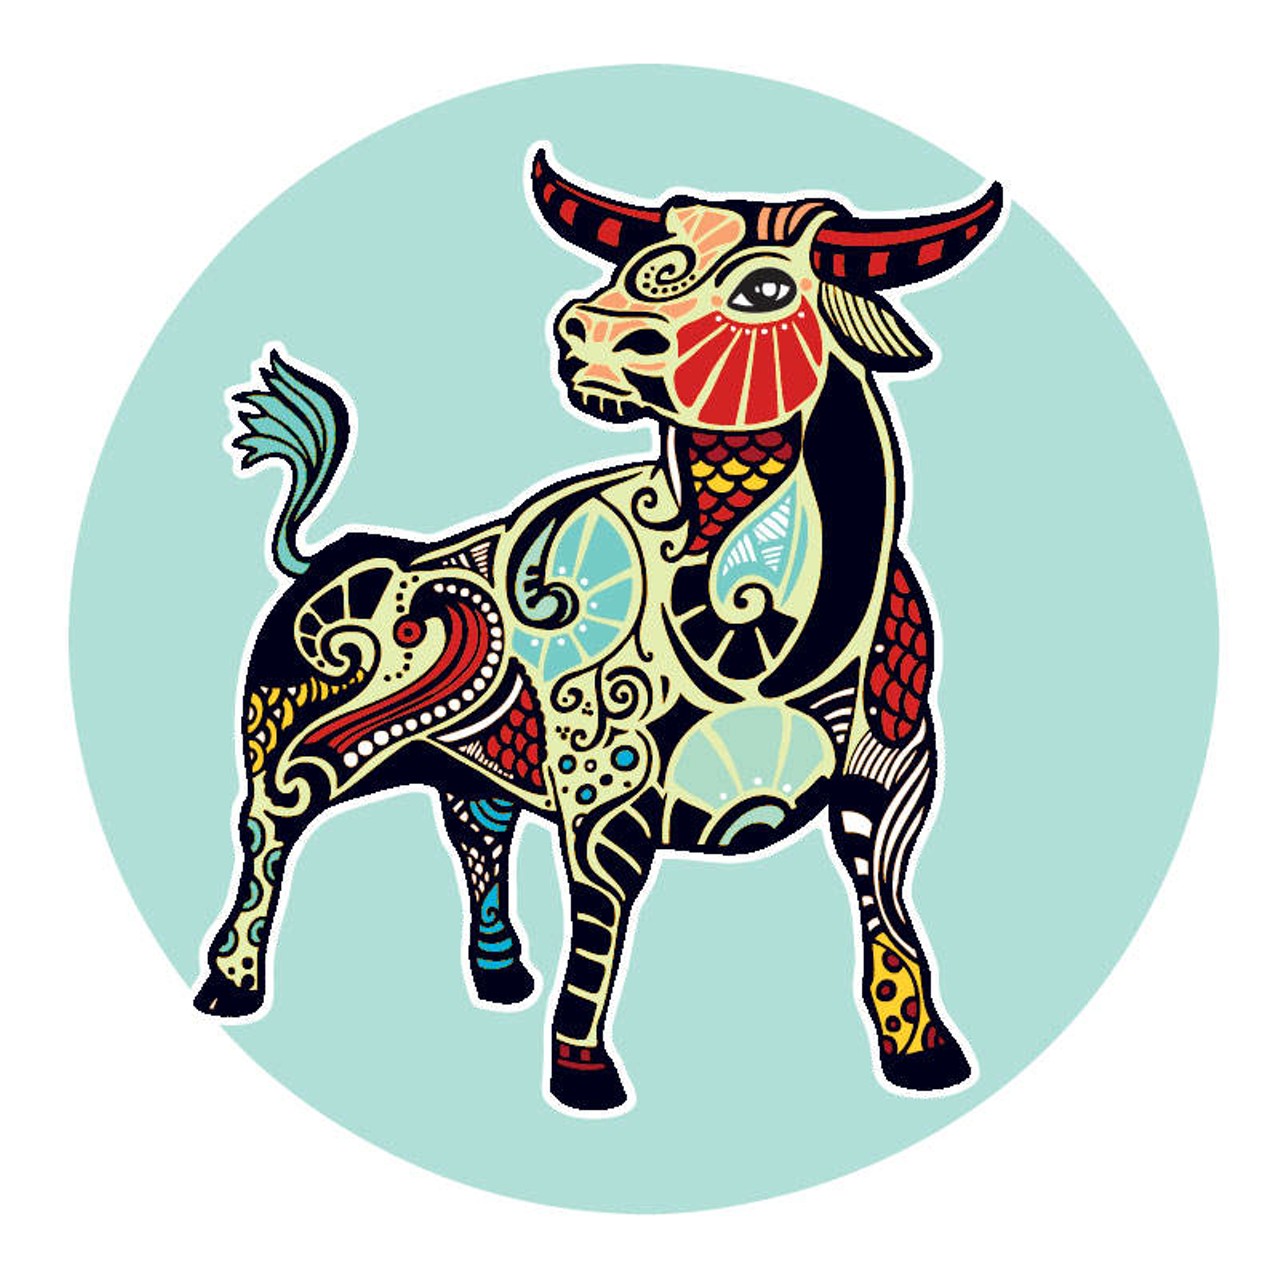 TAURUS (April 21 -May 20): 
As intense as things have been, good things are growing out of this time. You feel clearer and steadier knowing that even better things will come forth if you just keep this up. For many of you that translates as keeping your nose to the grindstone when it&#146;s more about keeping your heart centered in whatever you&#146;re doing. You tend to get confused when it comes to remembering what&#146;s important. Don&#146;t allow yourself to get sucked in by the thought that diligence matters more than joy. Keep the joy quotient high and approach your work with an open heart.